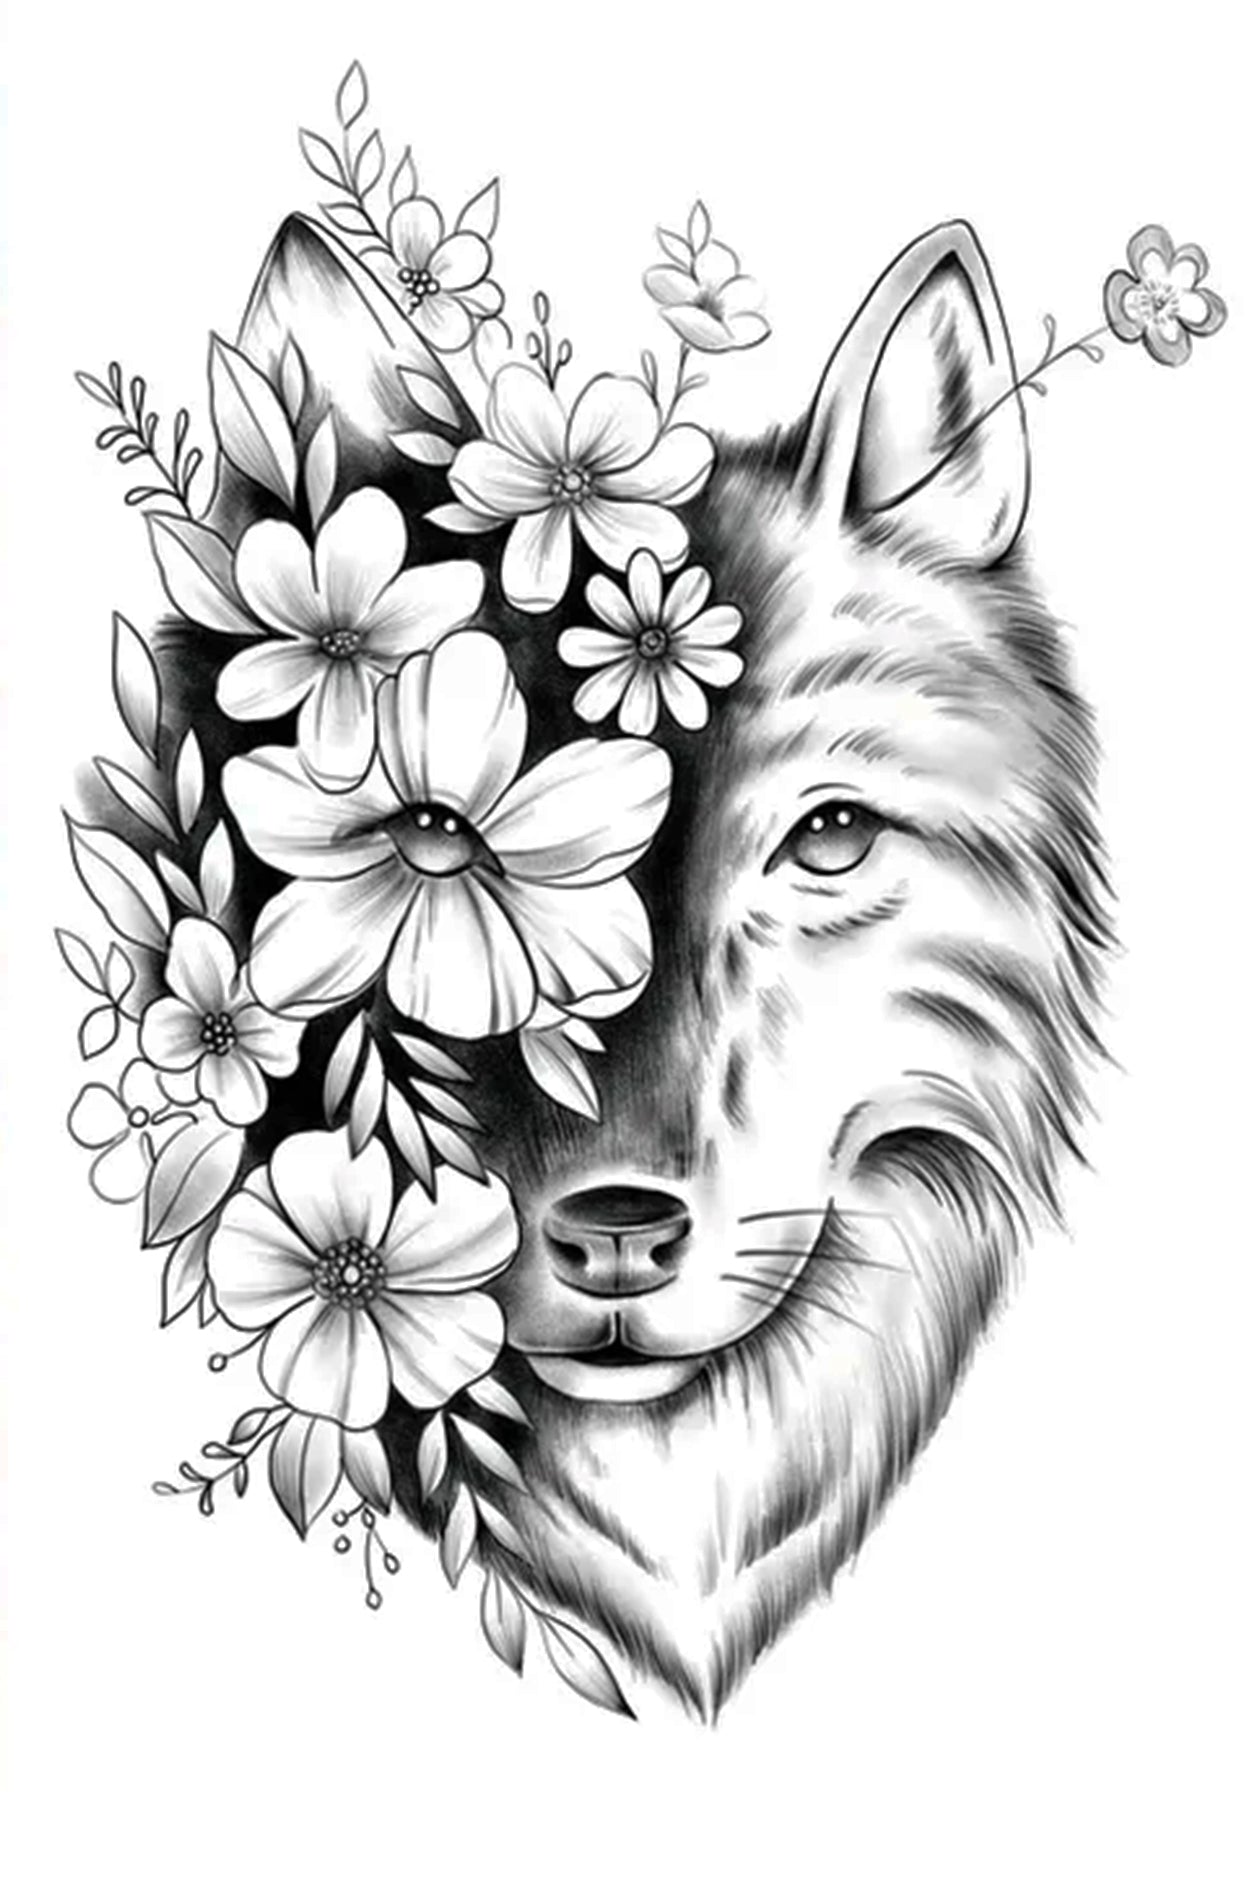 A sly friendly wolf peers around and through a wildflower bunch. His eyes are as bright as his smile. This tattoo represents a combination of the delicate and wild nature.